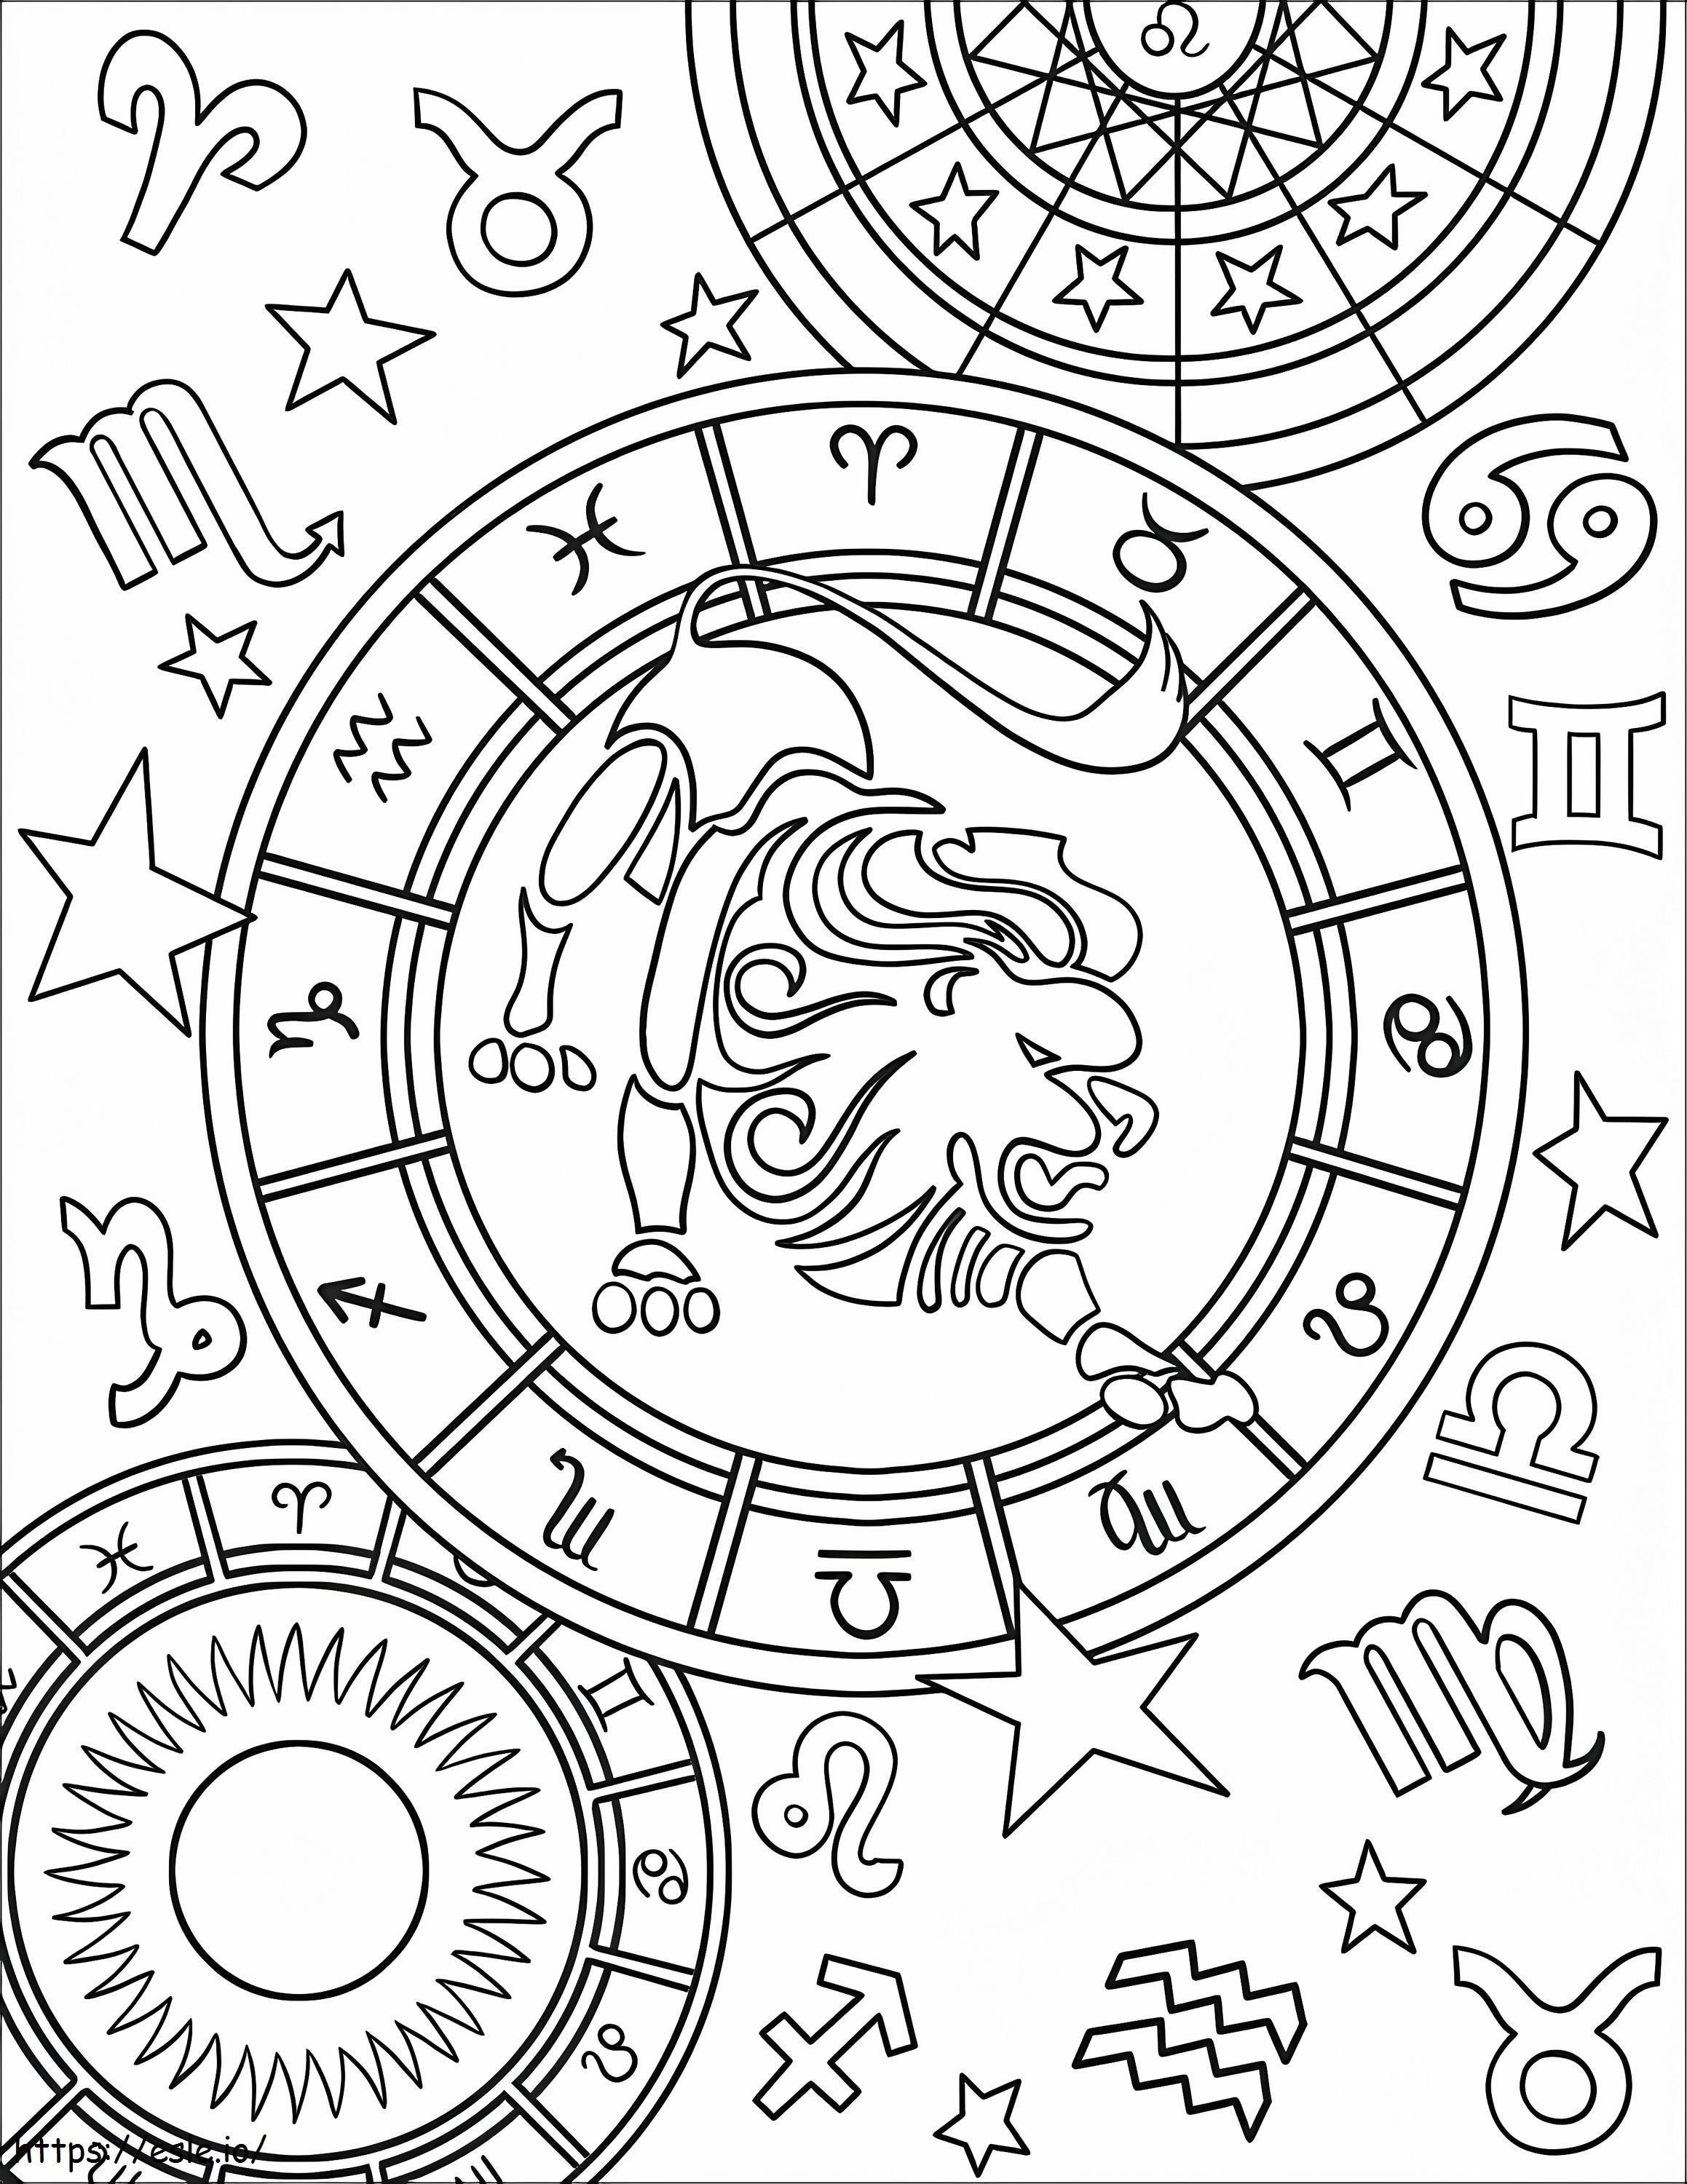 1597710596 Leo Zodiac Sign coloring page